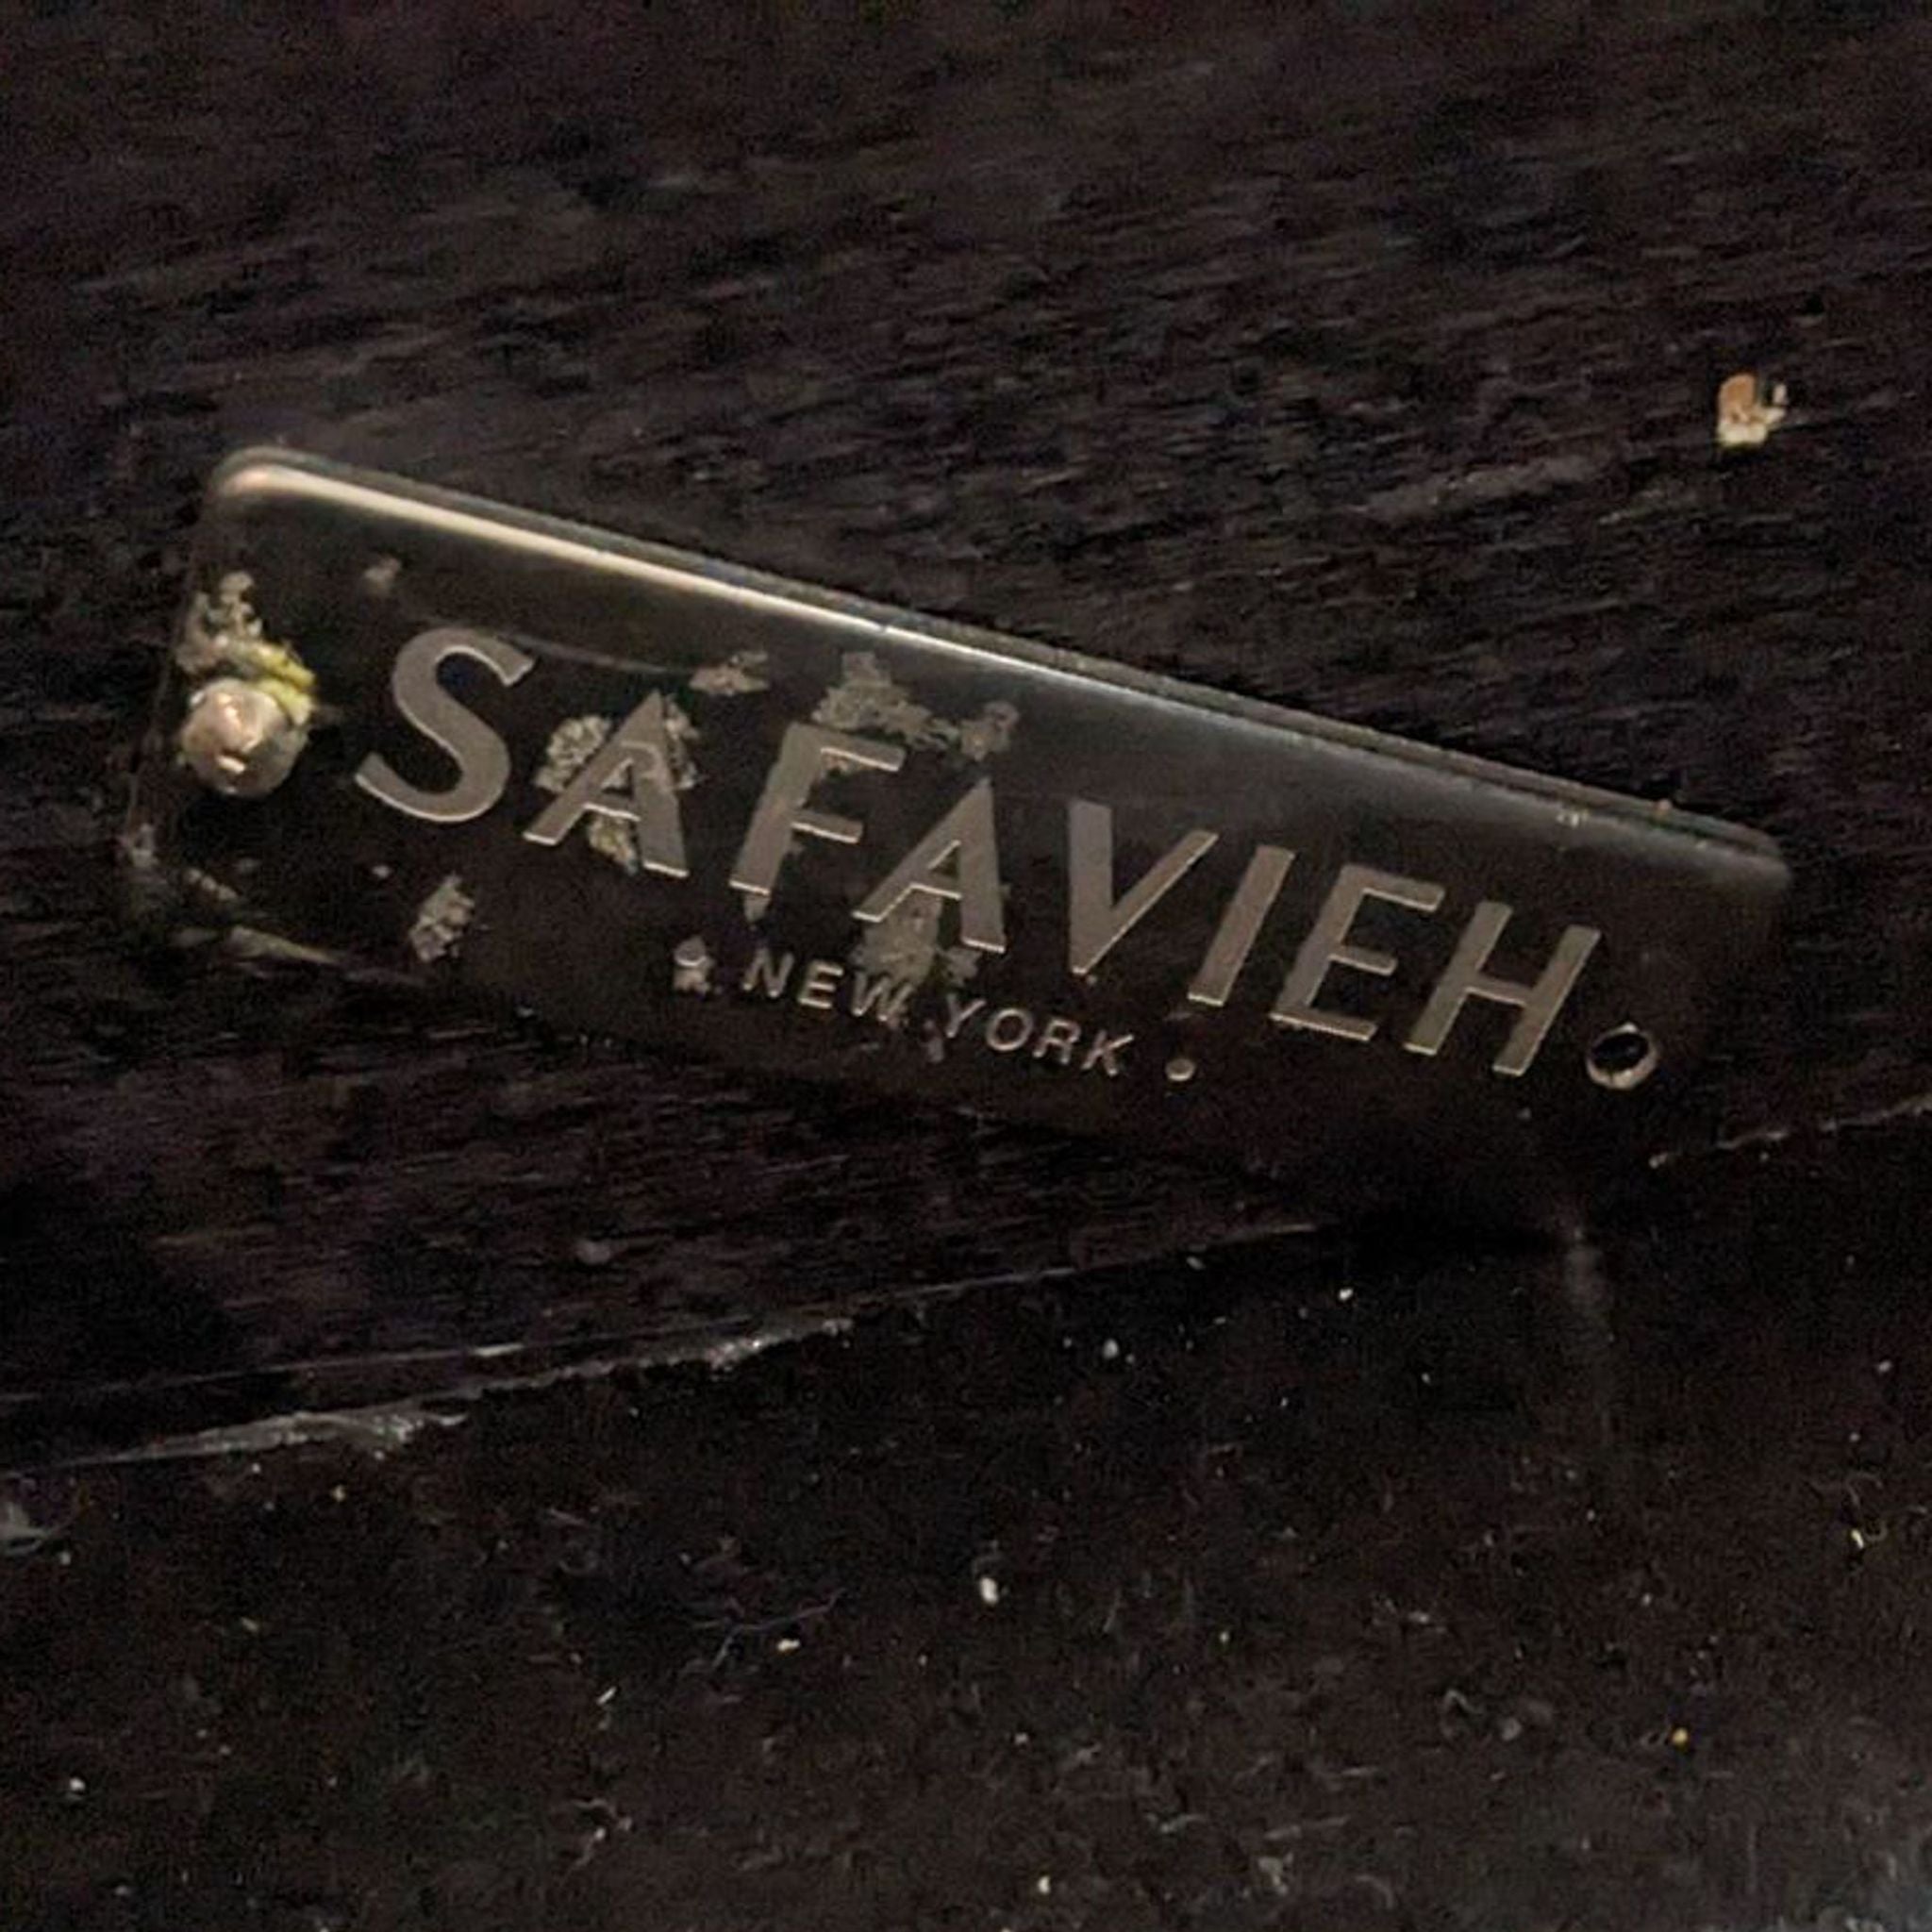 Close-up of a Safavieh brand label on a black nightstand showing scratches and wear.